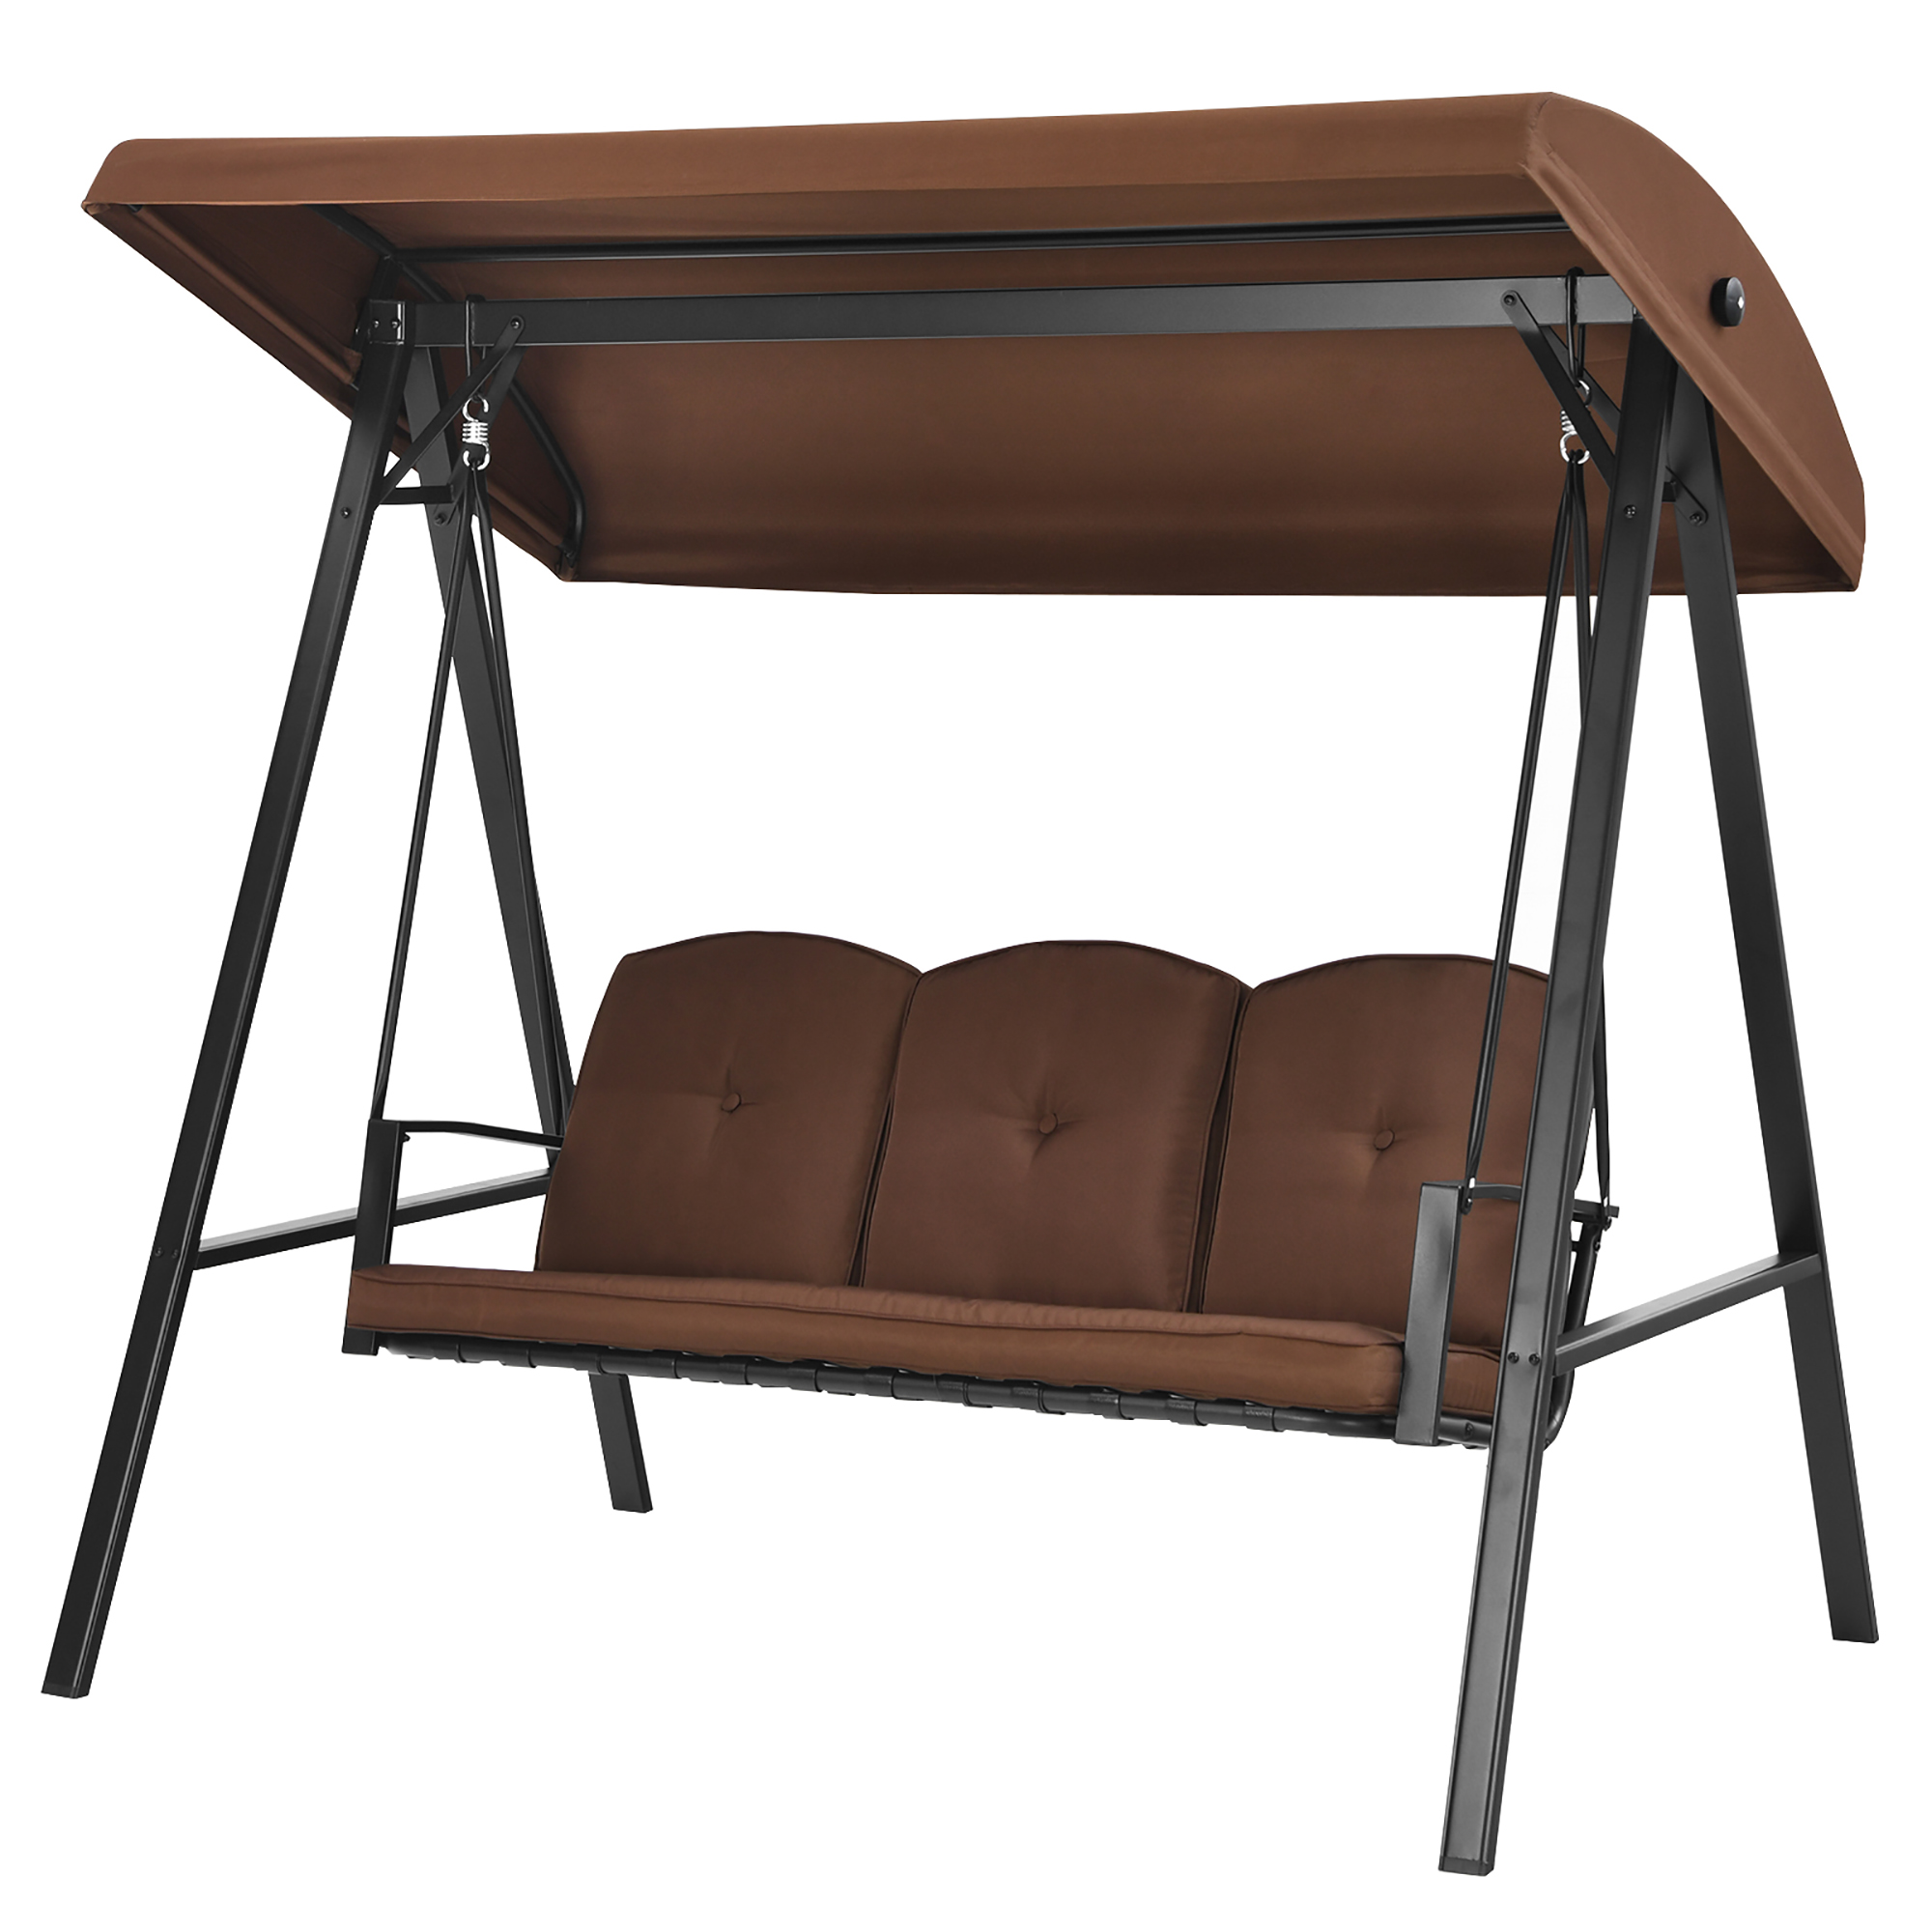 Costway Outdoor 3-Seat Porch Swing with Adjust Canopy and Cushions Brown - image 2 of 10